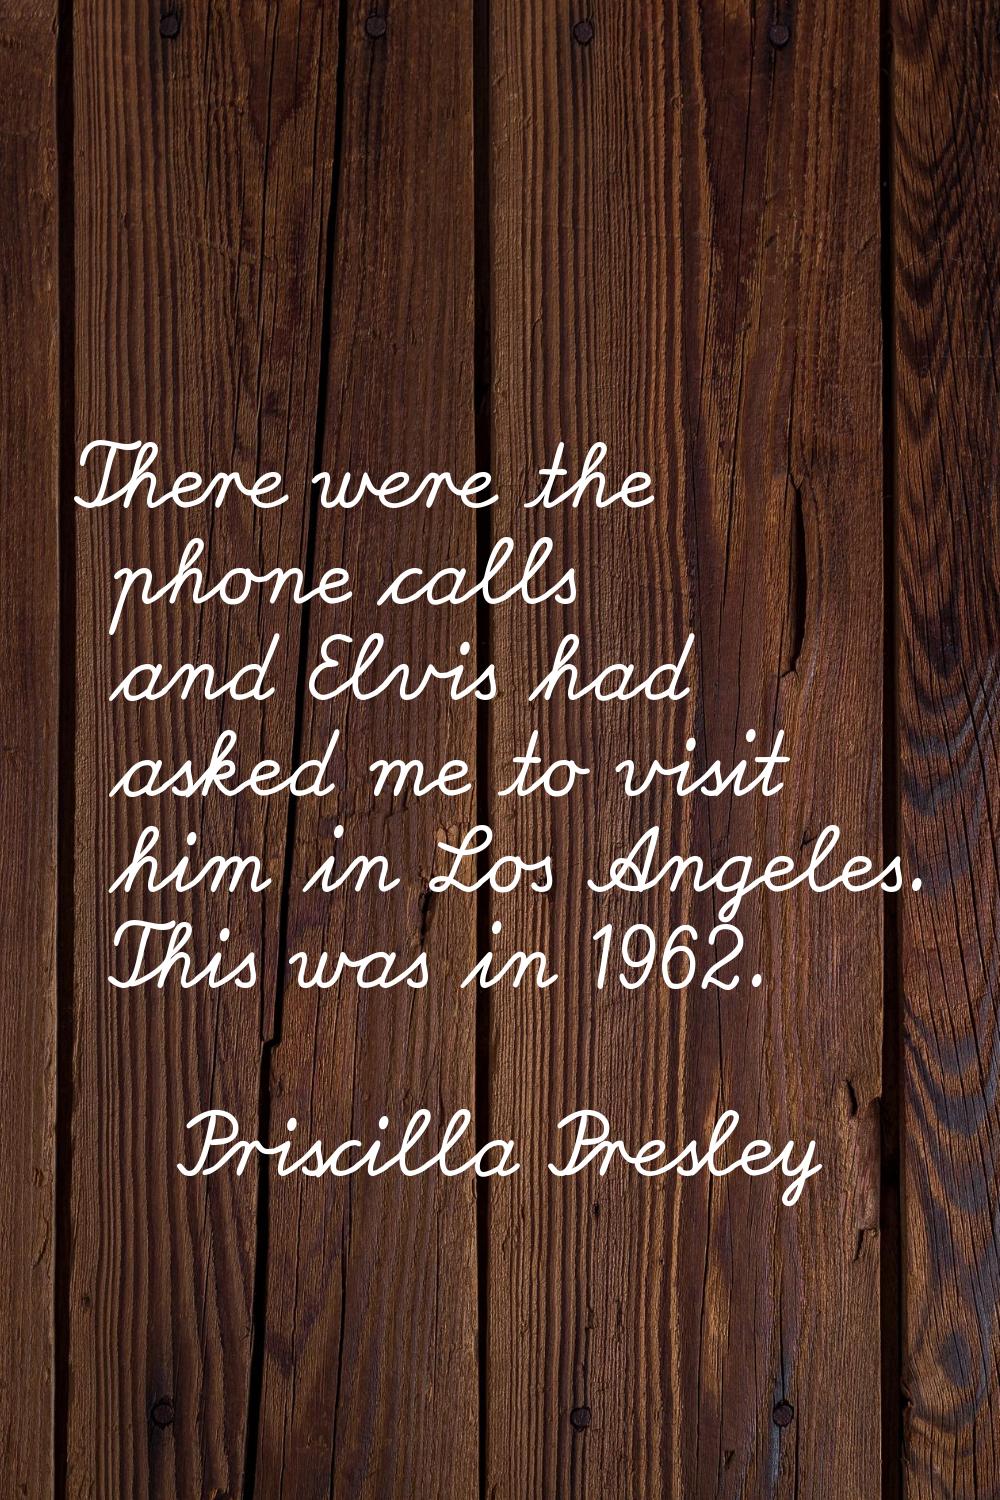 There were the phone calls and Elvis had asked me to visit him in Los Angeles. This was in 1962.